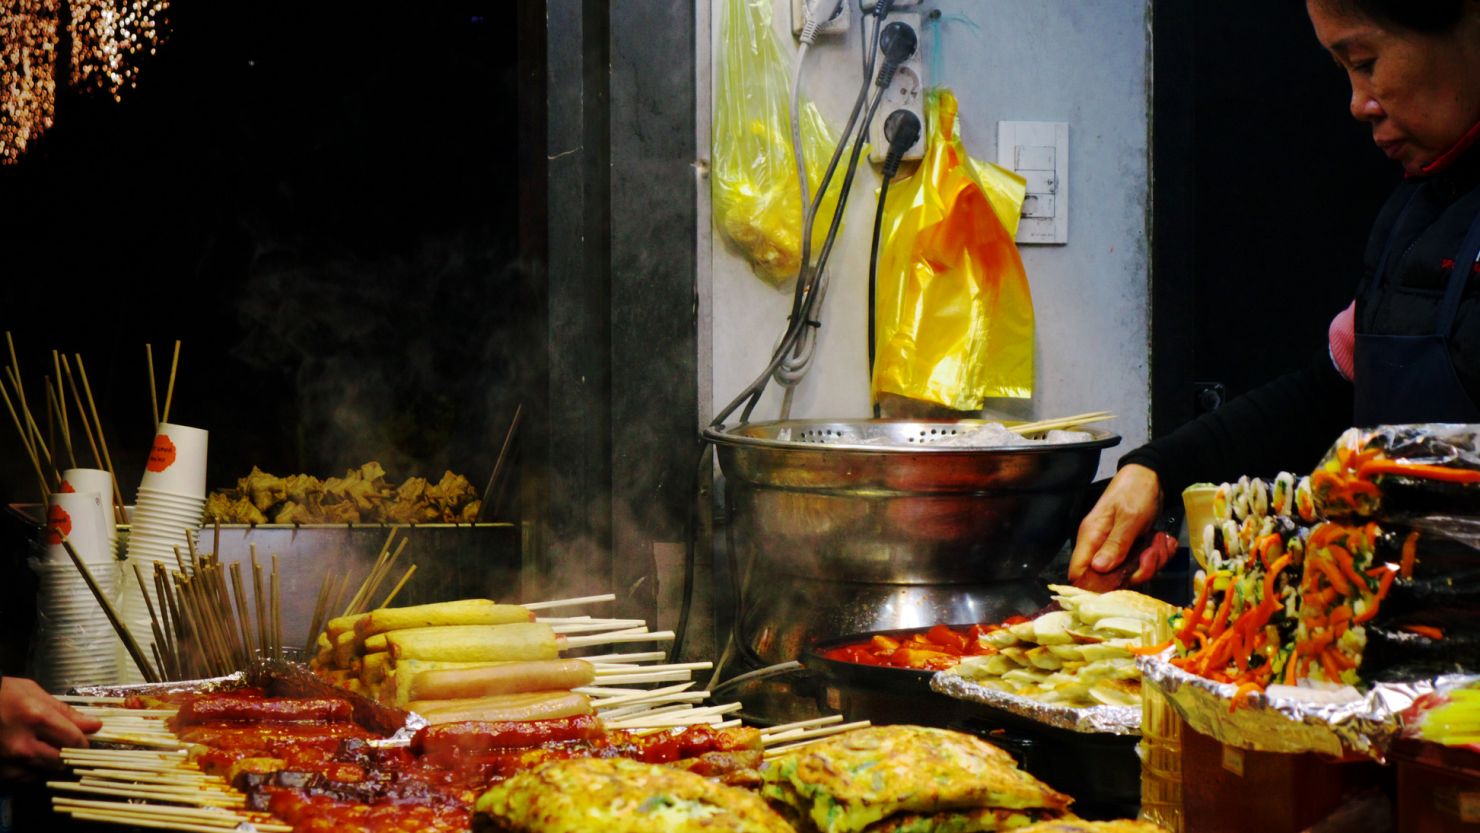 Seoul is renowned for its food -- especially its BBQ dishes.